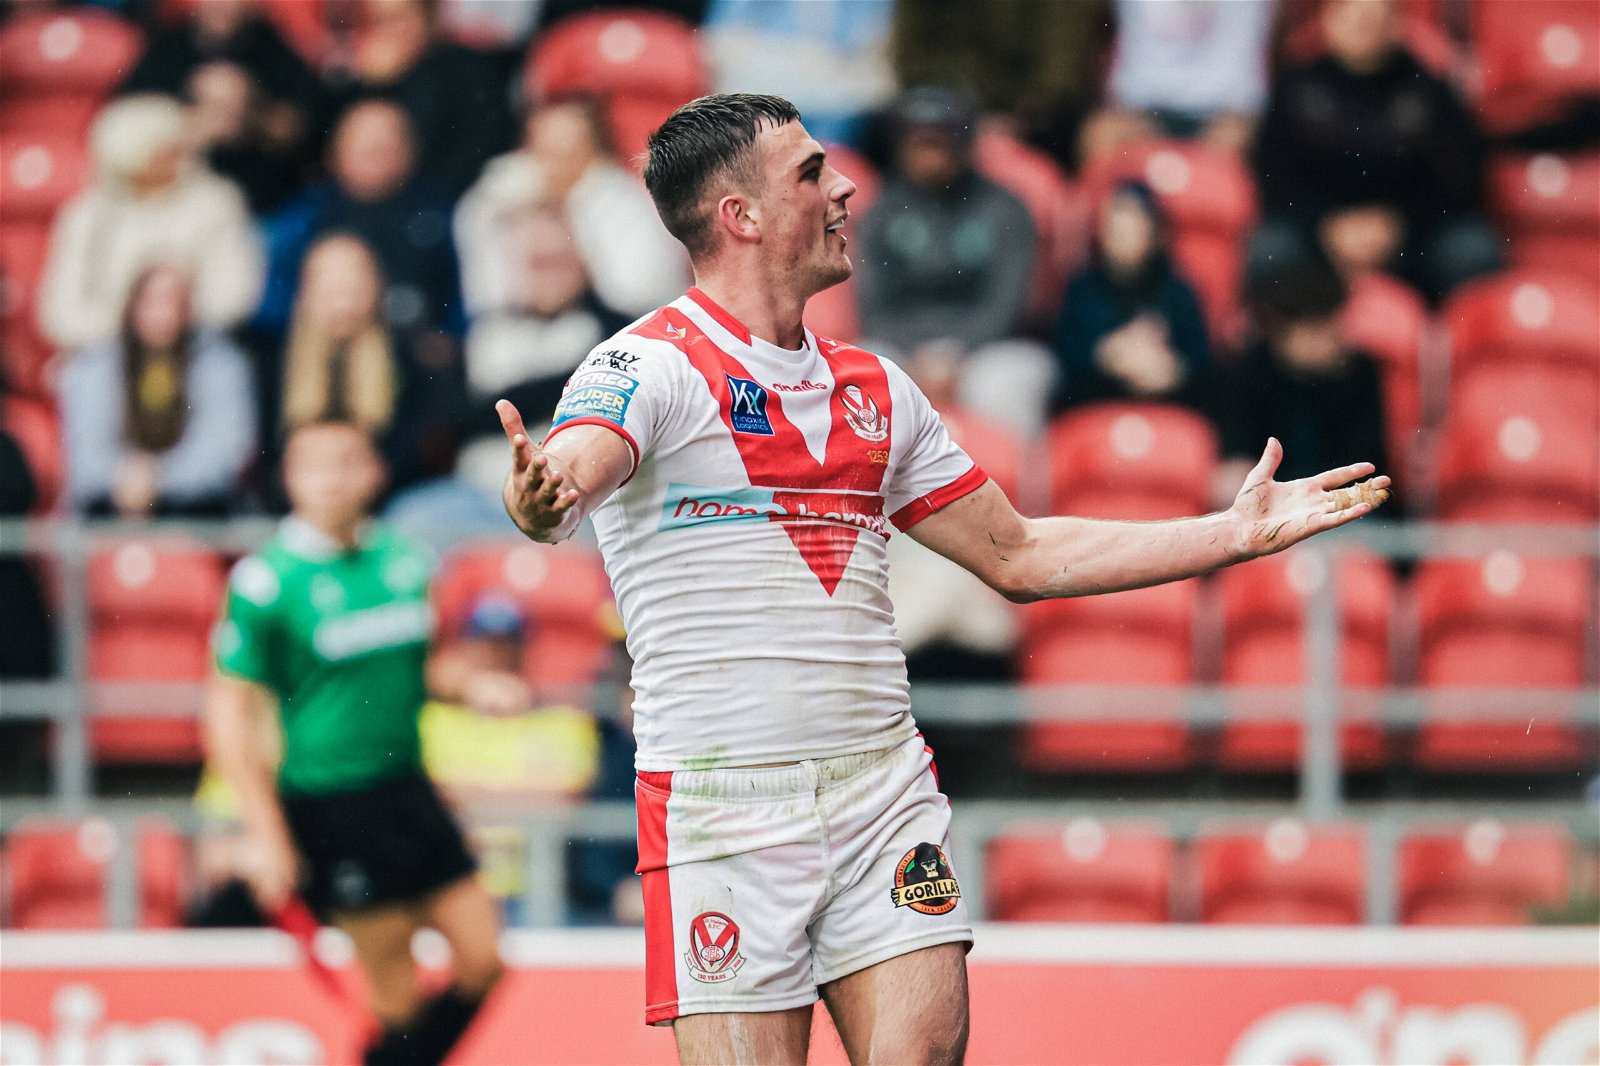 St Helens star Lewis Dodd has been linked with a move from Super League to the Dragons